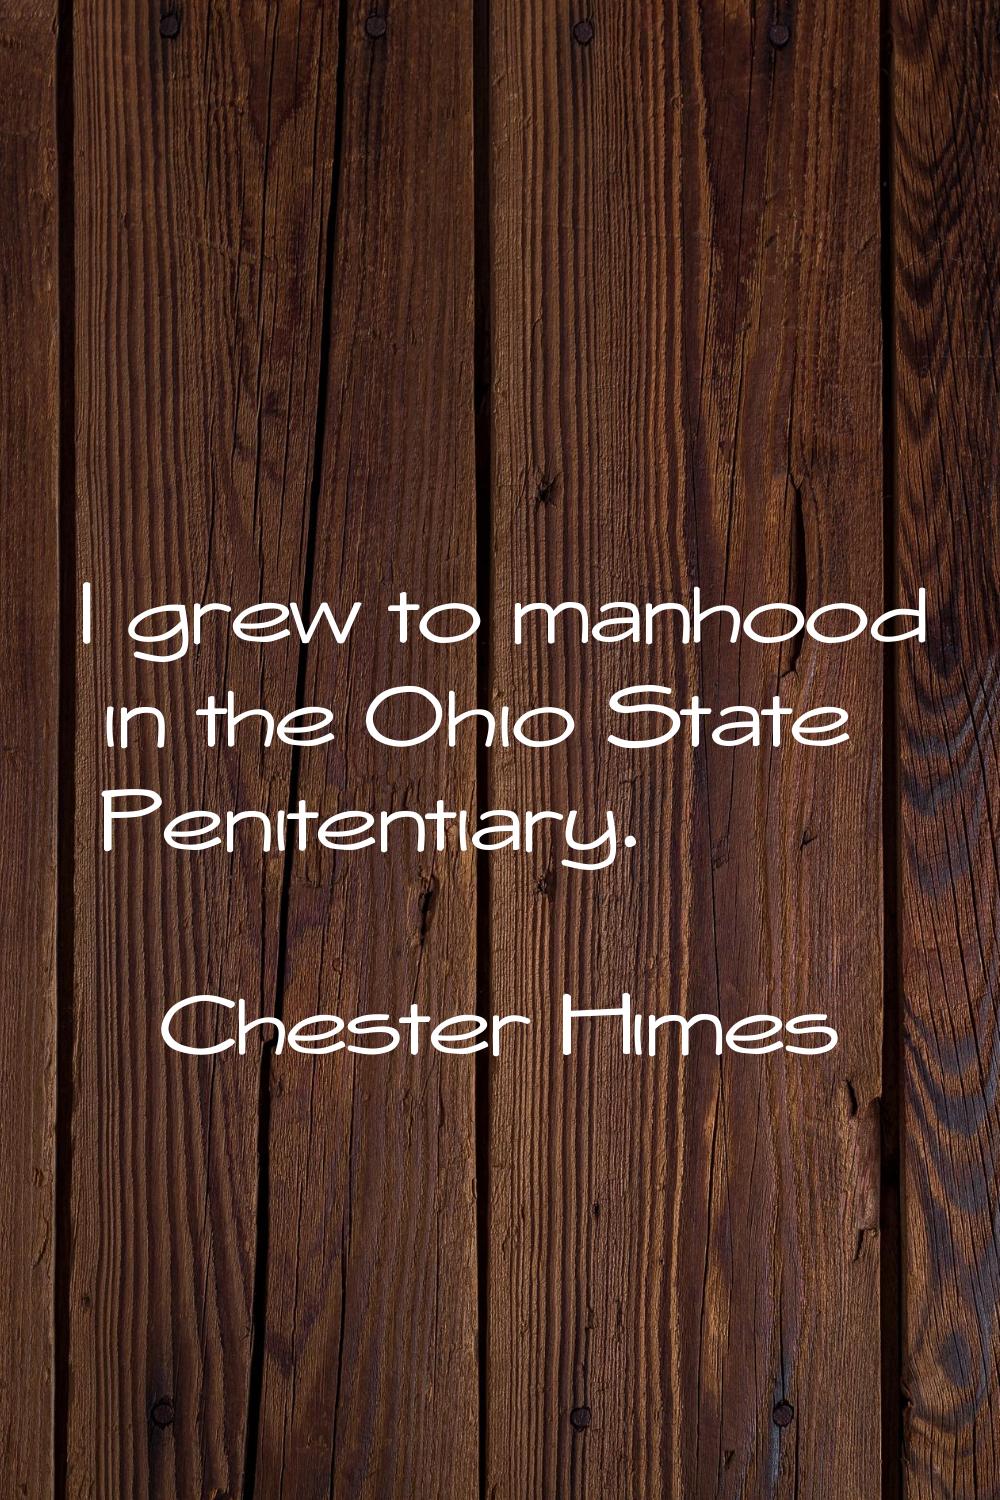 I grew to manhood in the Ohio State Penitentiary.